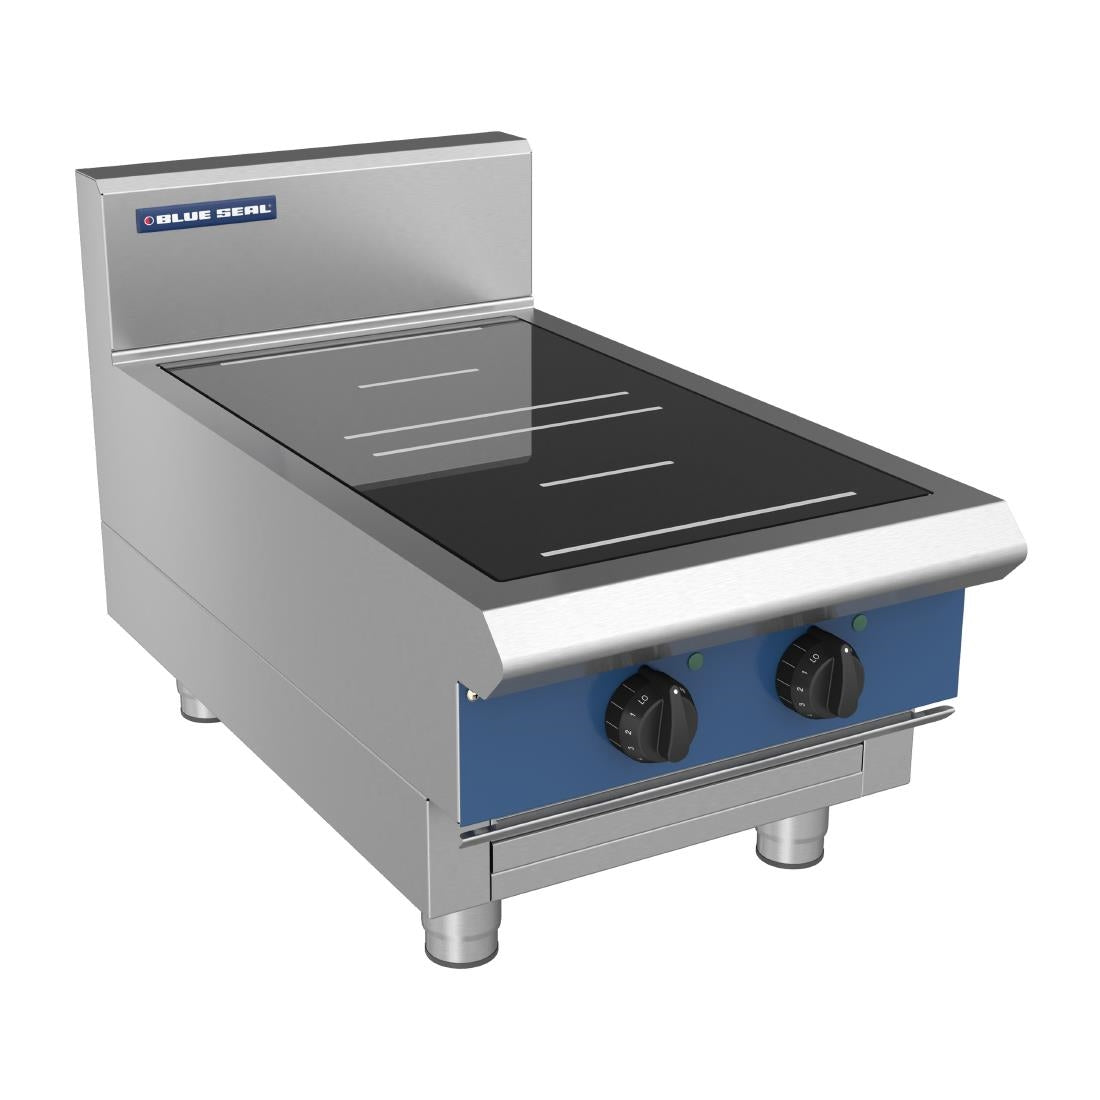 DX755 Blue Seal Dual Zone Countertop Induction Hob 7kW IN512R3-B JD Catering Equipment Solutions Ltd